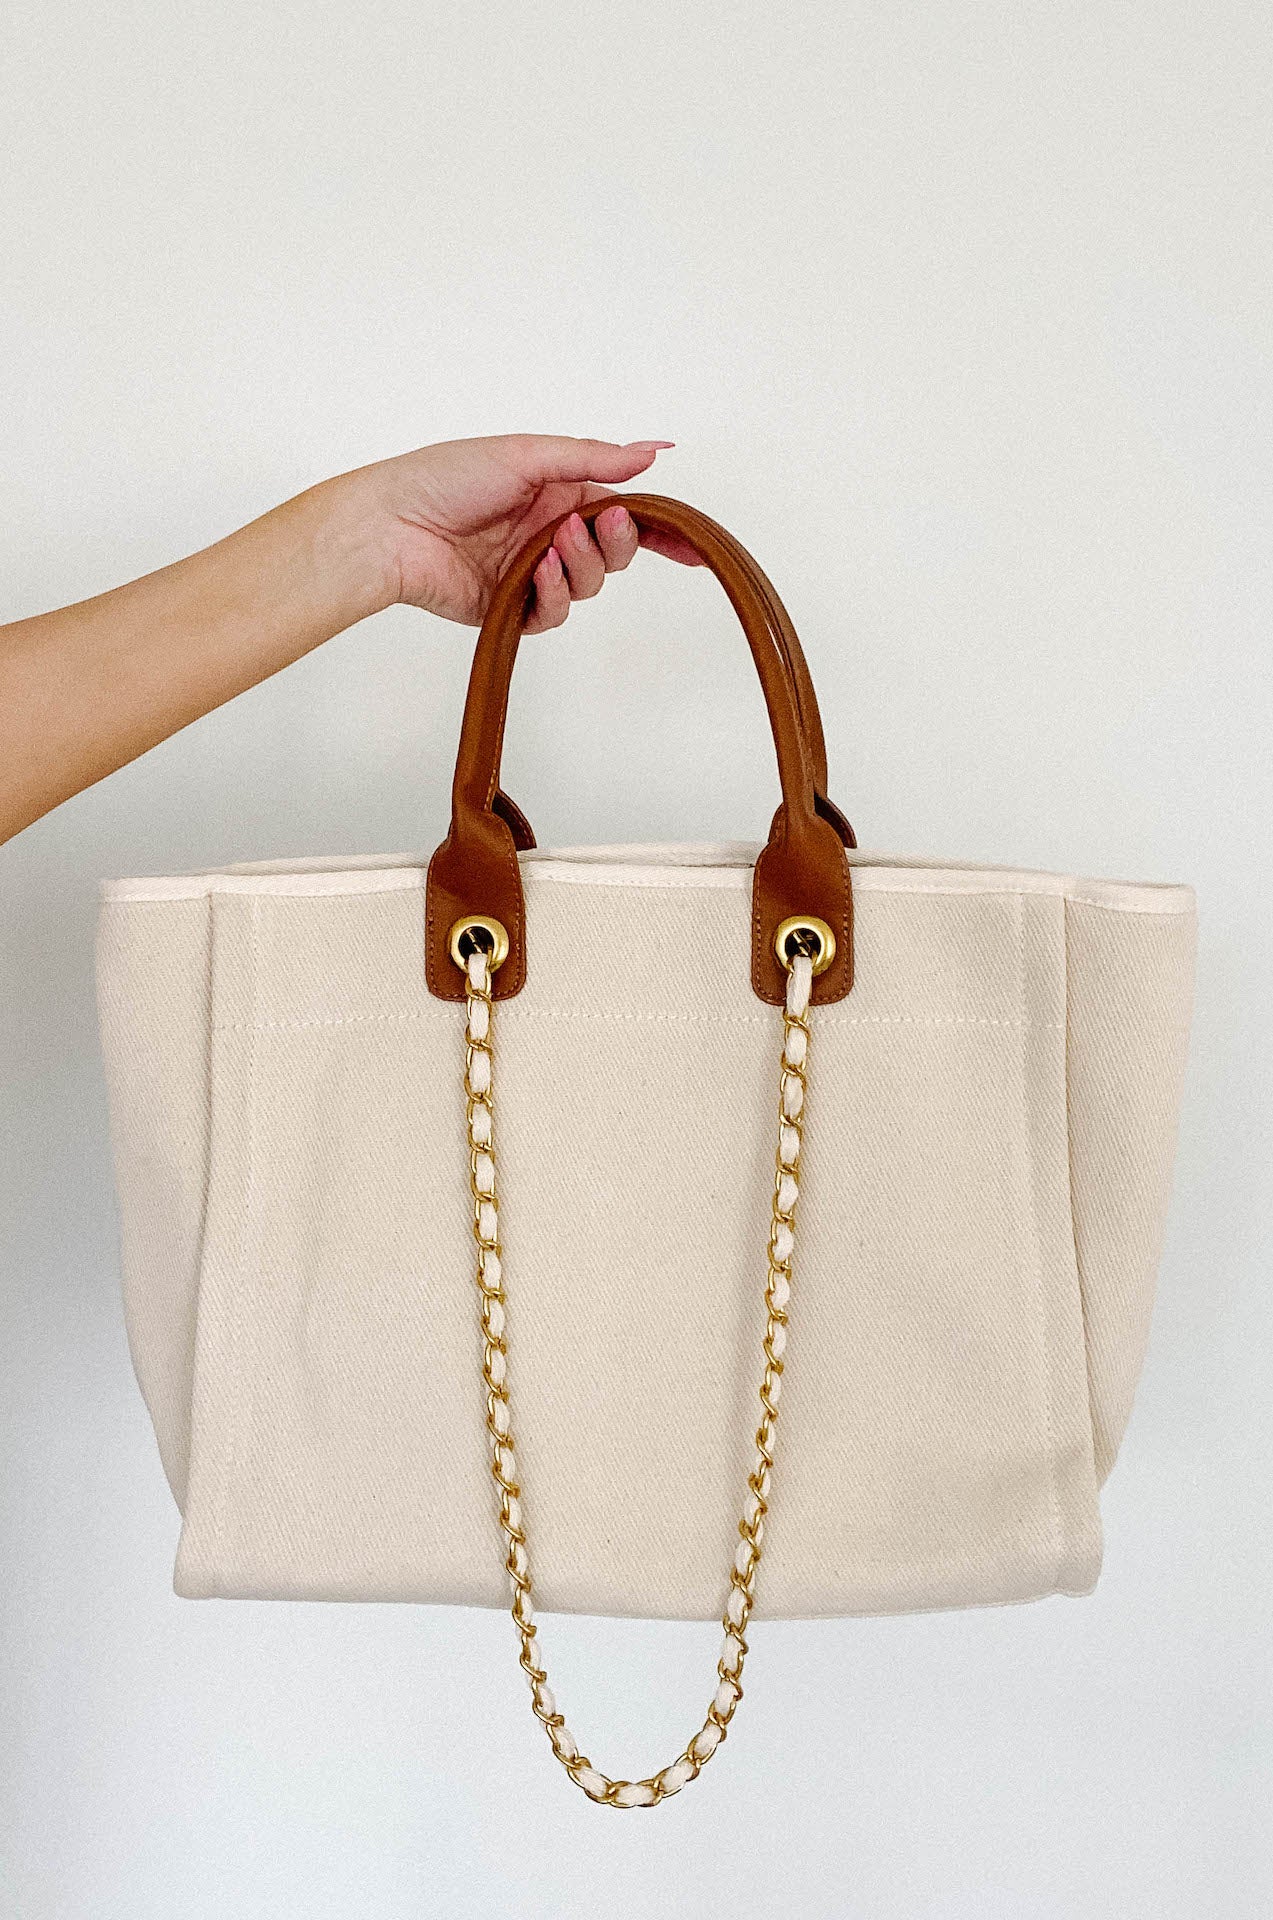 cream canvas tote hand bag with gold chain